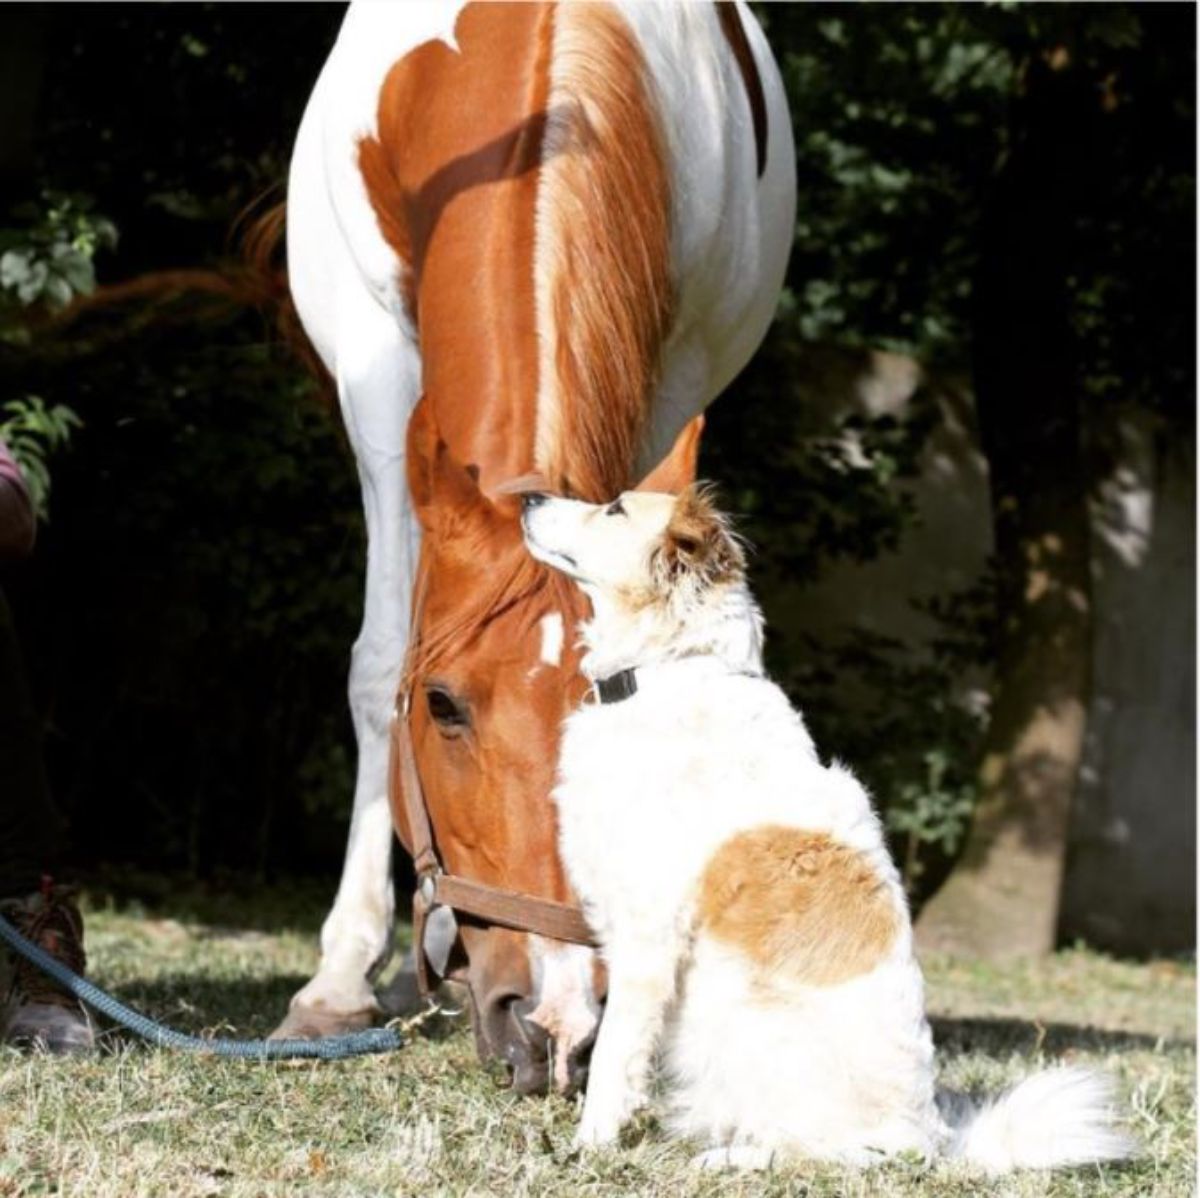 brown and white dog sitting in front of a brown and white horse